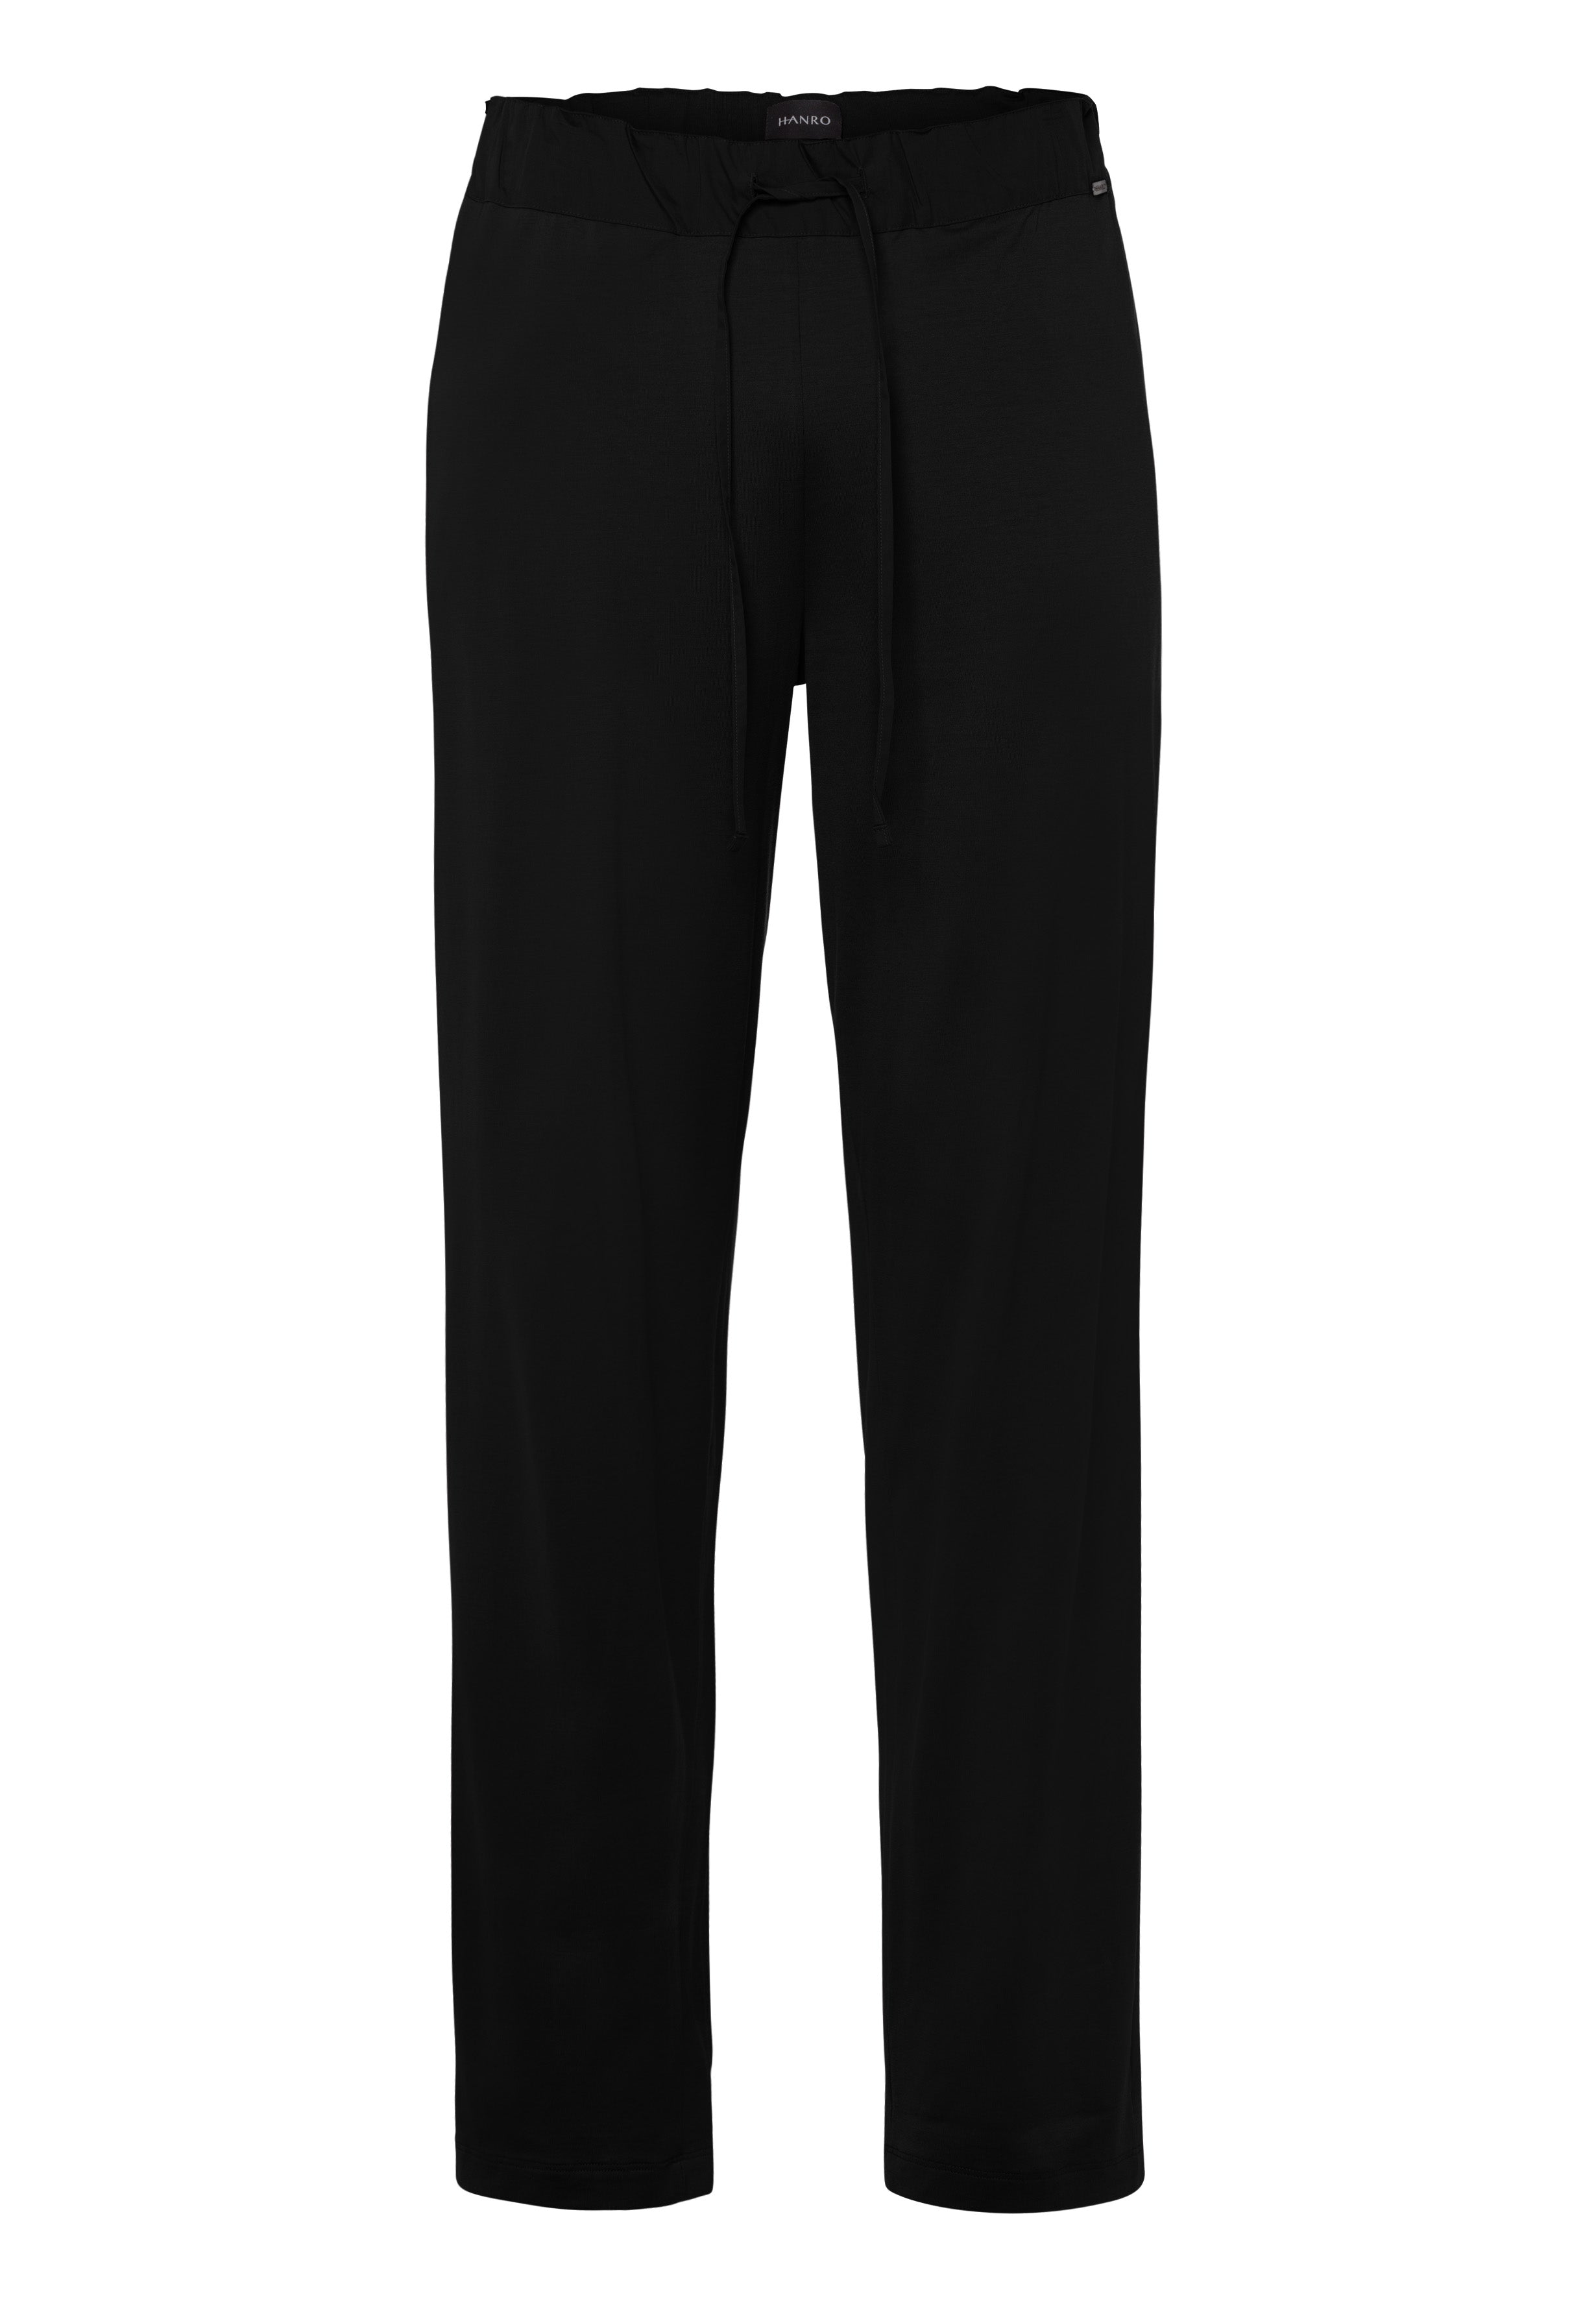 75435 Night And Day Knit Lounge Pant - 019 Black